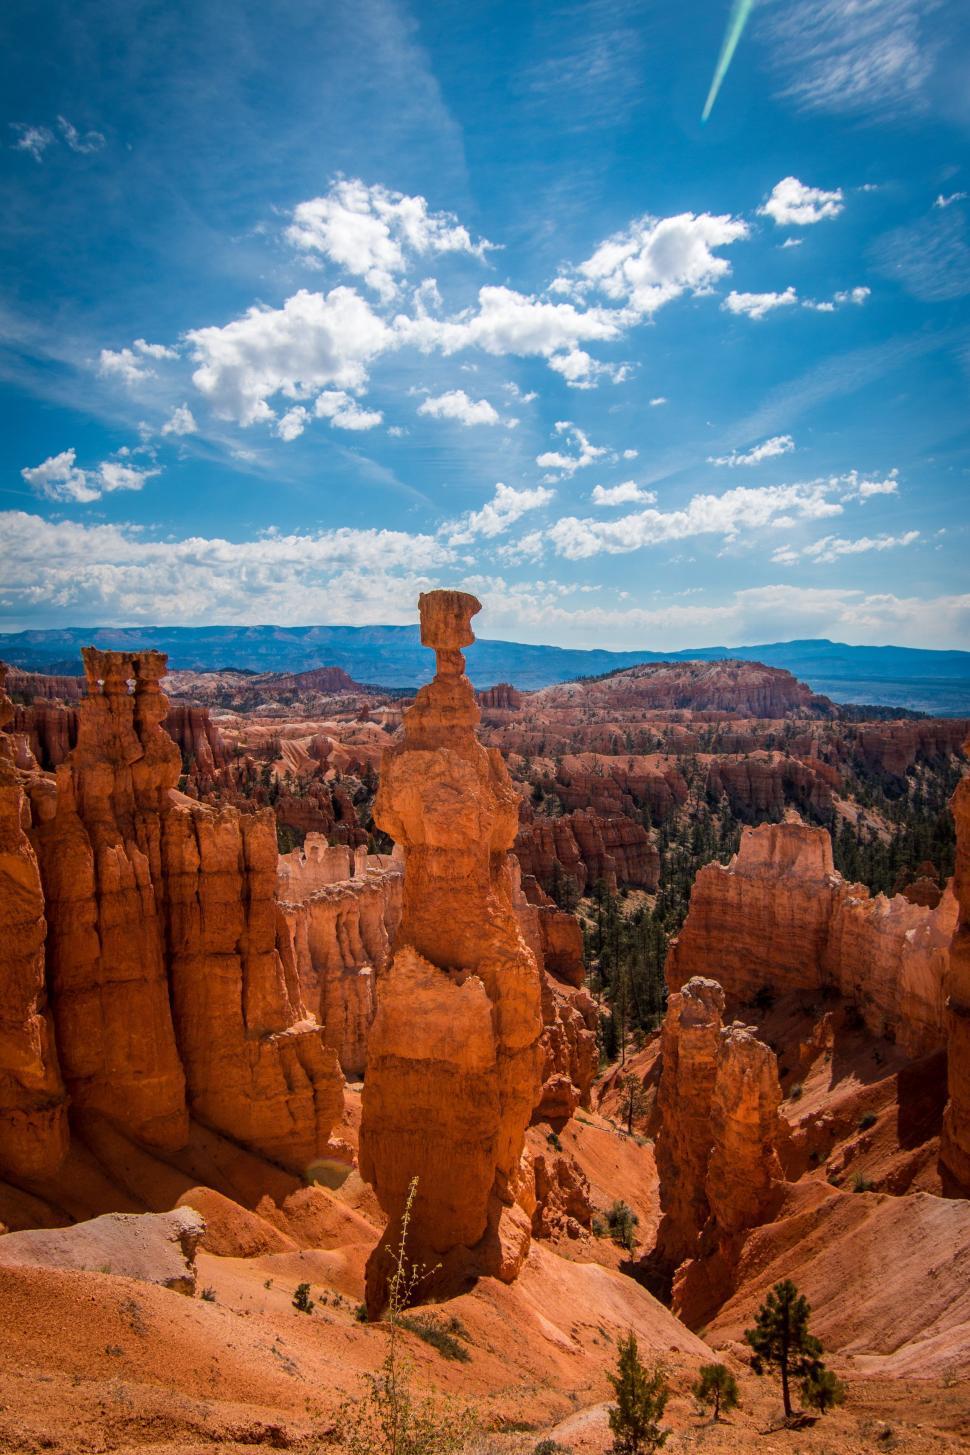 Free Image of Majestic View of the Hoodoos in Bryce Canyon National Park 